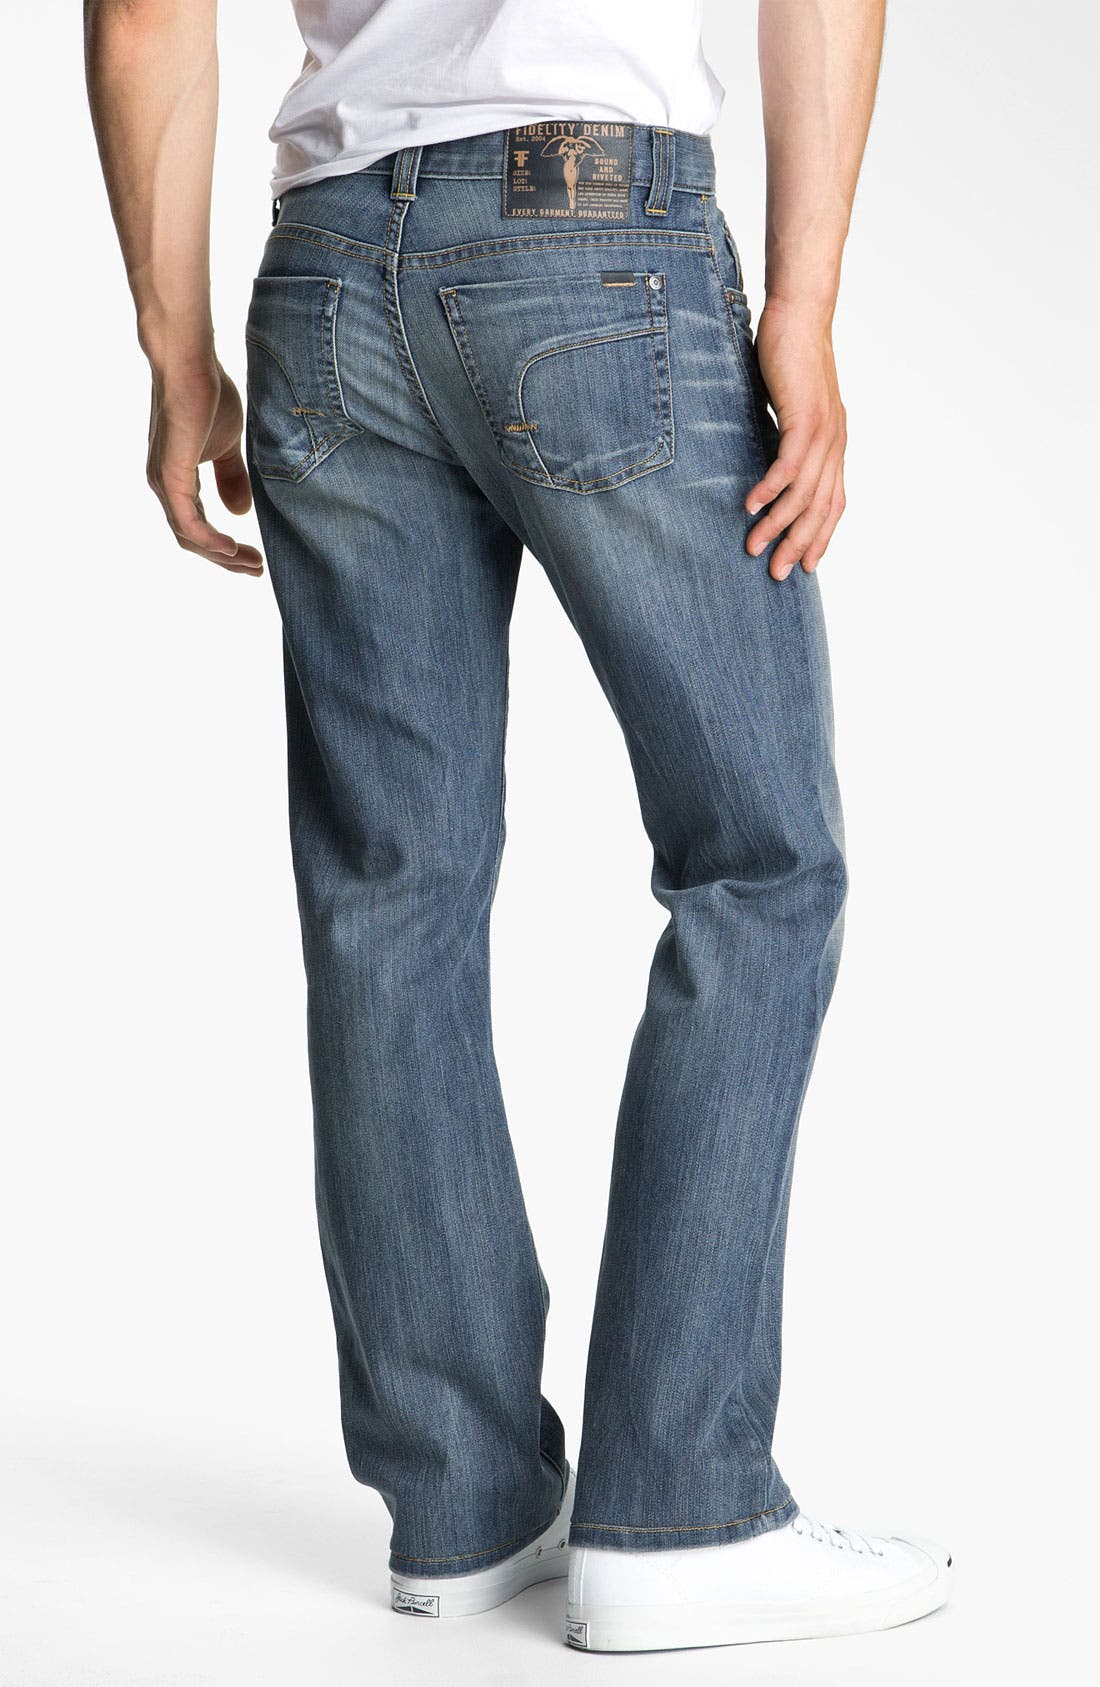 trigger jeans pant price